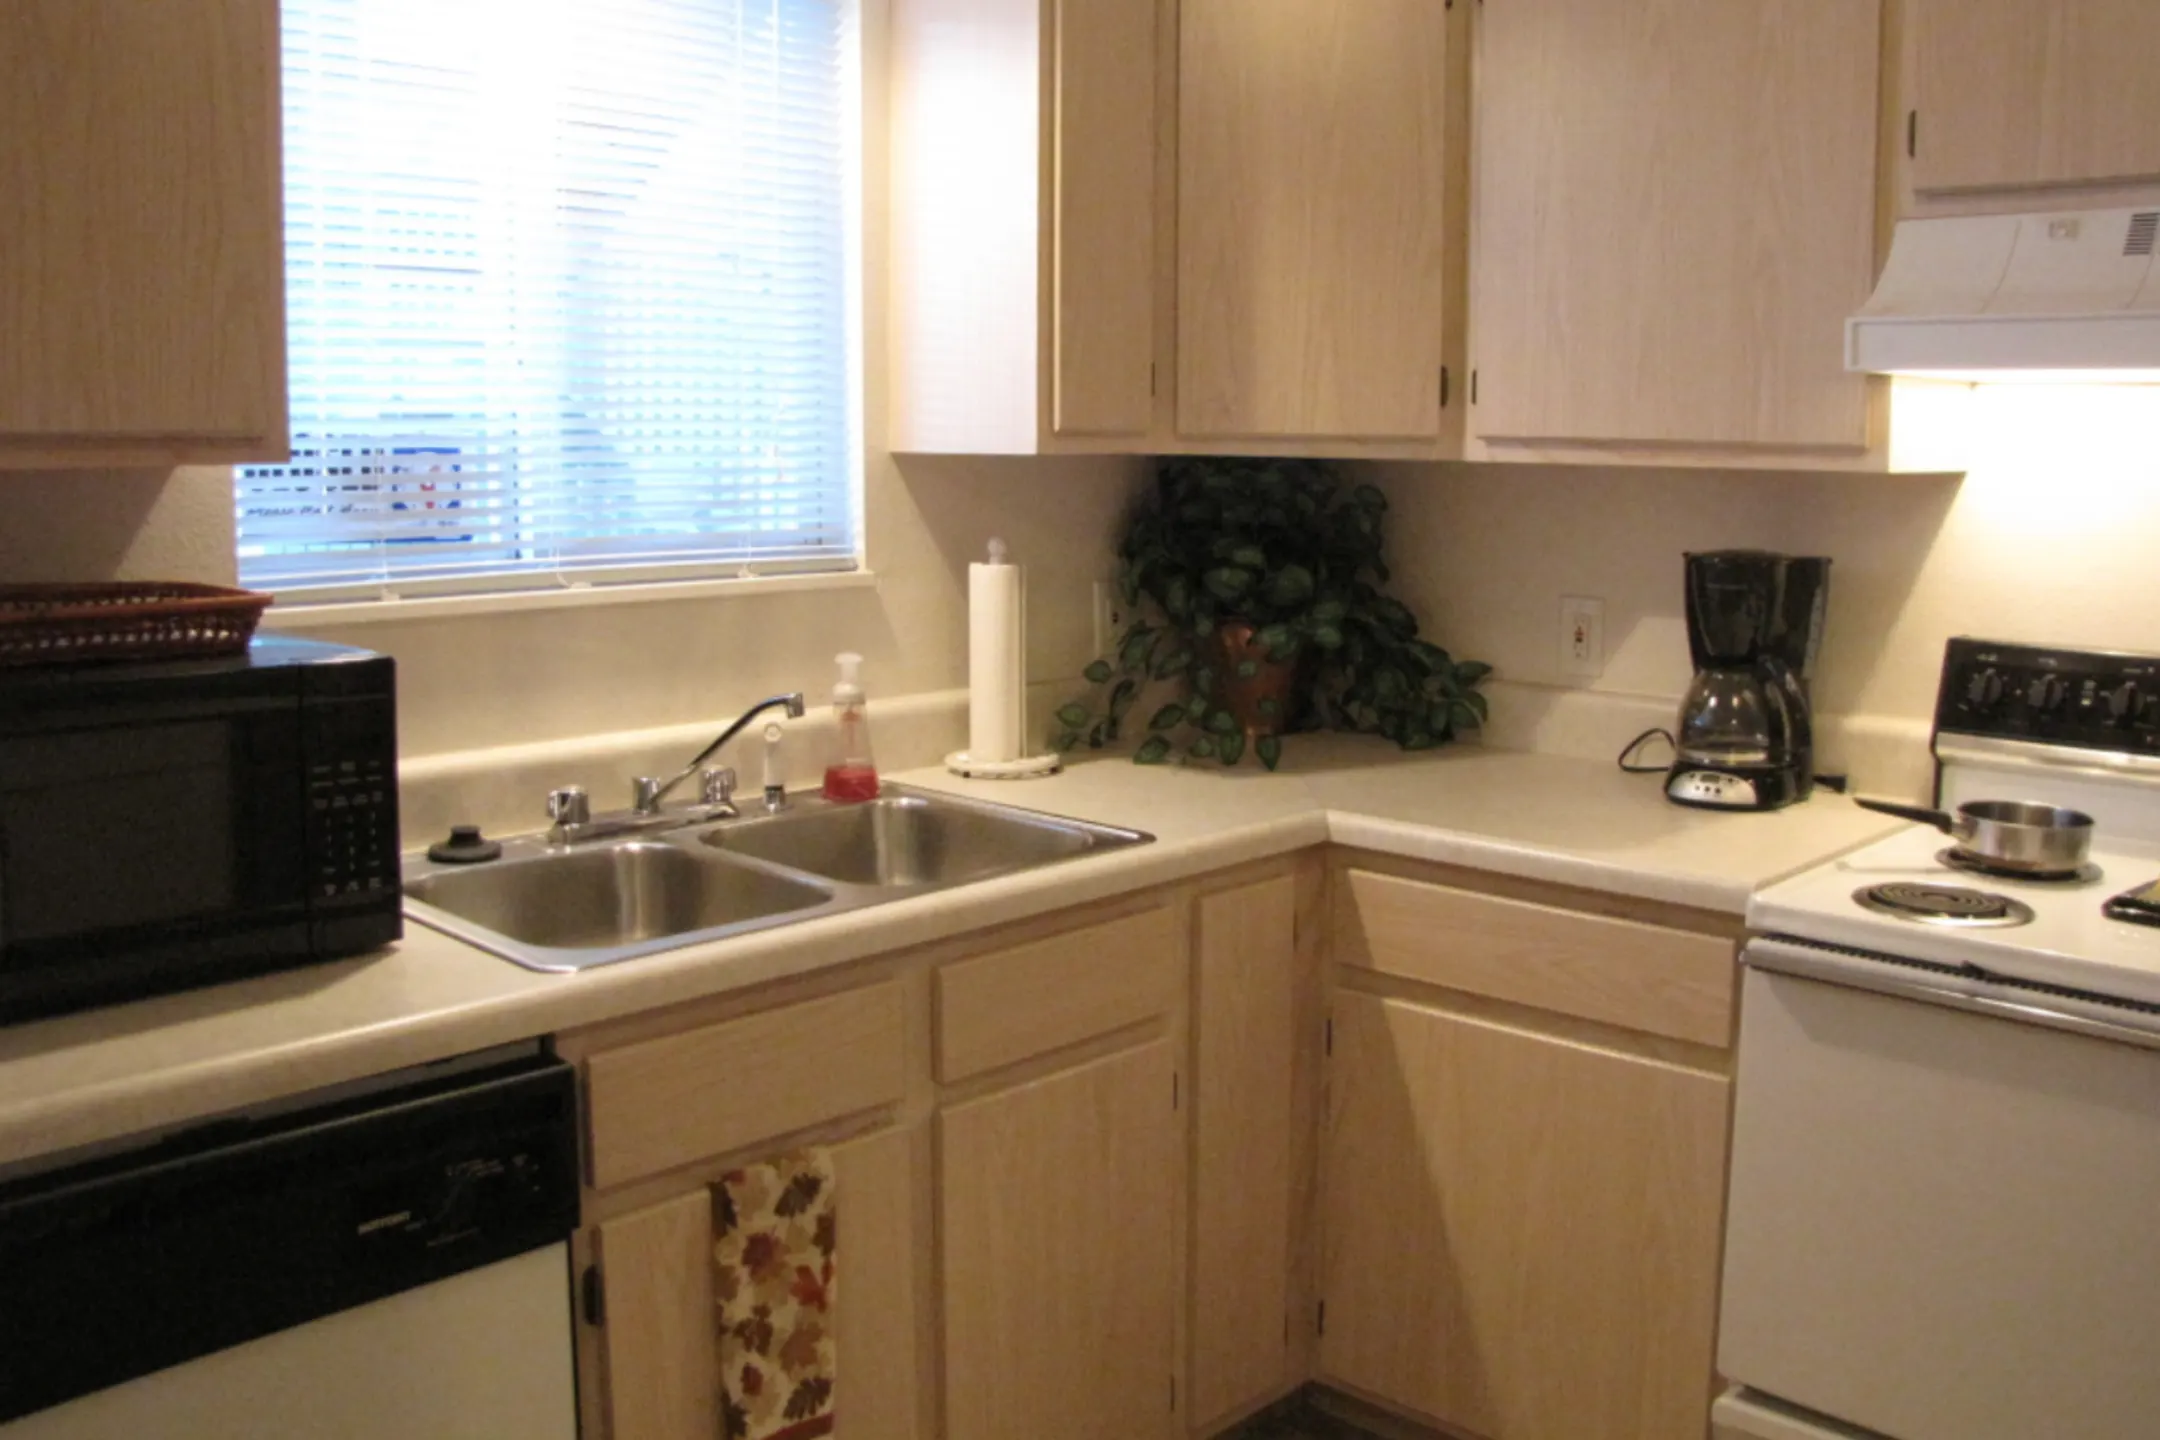 Kitchen - Country View Apartments - Toledo, OH